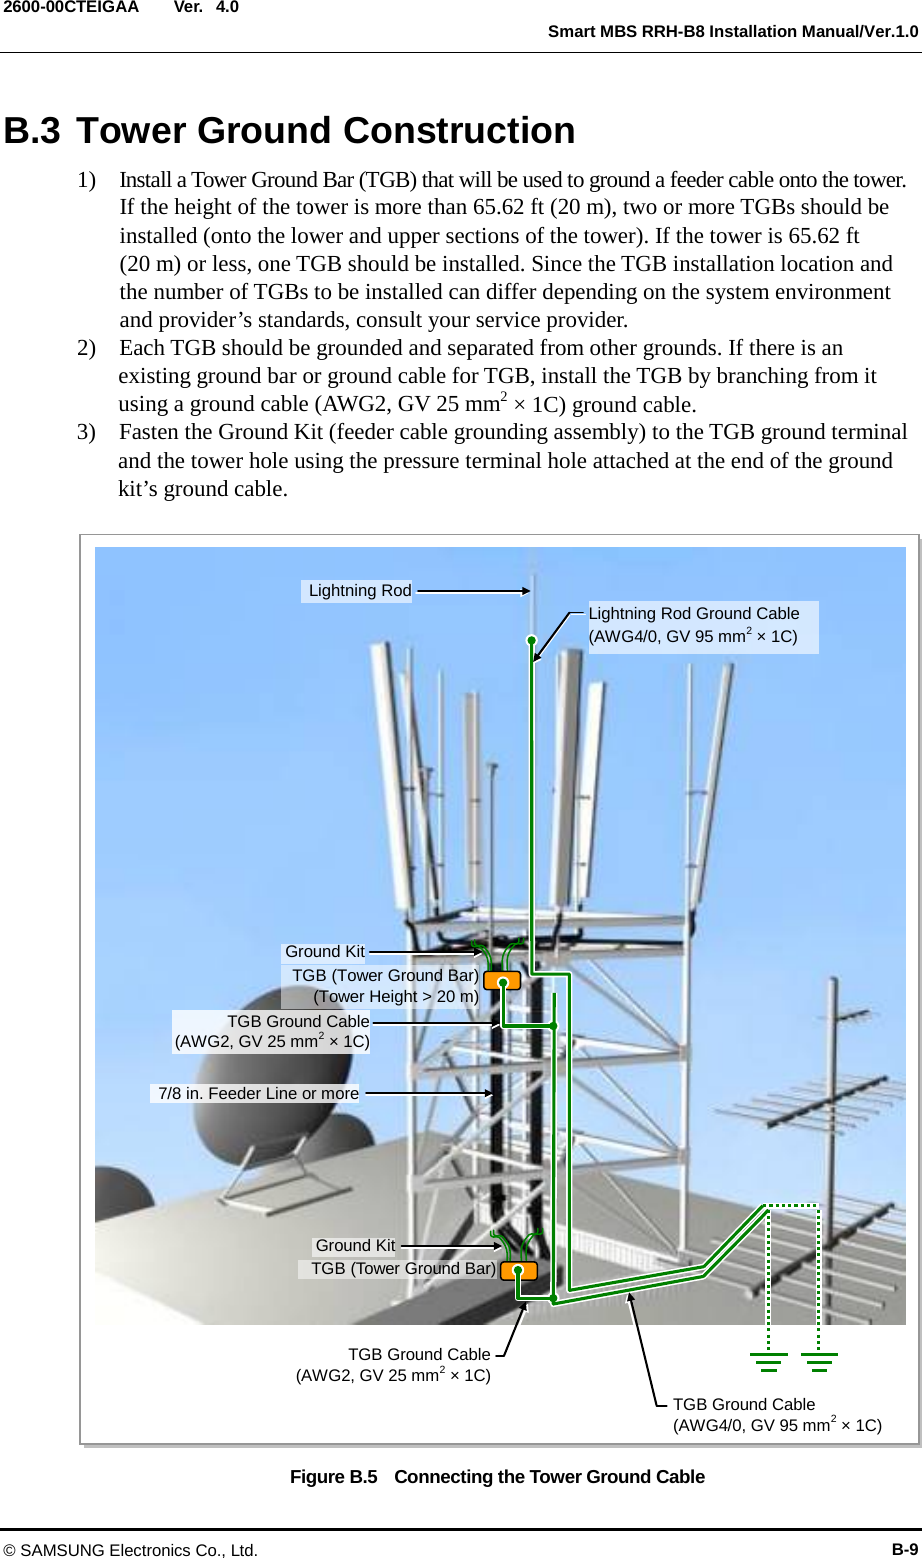  Ver.   Smart MBS RRH-B8 Installation Manual/Ver.1.0 2600-00CTEIGAA 4.0 B.3 Tower Ground Construction 1)  Install a Tower Ground Bar (TGB) that will be used to ground a feeder cable onto the tower.   If the height of the tower is more than 65.62 ft (20 m), two or more TGBs should be installed (onto the lower and upper sections of the tower). If the tower is 65.62 ft   (20 m) or less, one TGB should be installed. Since the TGB installation location and the number of TGBs to be installed can differ depending on the system environment and provider’s standards, consult your service provider. 2)    Each TGB should be grounded and separated from other grounds. If there is an existing ground bar or ground cable for TGB, install the TGB by branching from it using a ground cable (AWG2, GV 25 mm2 × 1C) ground cable. 3)    Fasten the Ground Kit (feeder cable grounding assembly) to the TGB ground terminal and the tower hole using the pressure terminal hole attached at the end of the ground kit’s ground cable.  Figure B.5  Connecting the Tower Ground Cable Lightning Rod 7/8 in. Feeder Line or more Ground Kit TGB (Tower Ground Bar)  (Tower Height &gt; 20 m) TGB Ground Cable (AWG2, GV 25 mm2 × 1C) Lightning Rod Ground Cable (AWG4/0, GV 95 mm2 × 1C) TGB (Tower Ground Bar) Ground Kit TGB Ground Cable (AWG2, GV 25 mm2 × 1C) TGB Ground Cable (AWG4/0, GV 95 mm2 × 1C) © SAMSUNG Electronics Co., Ltd. B-9 